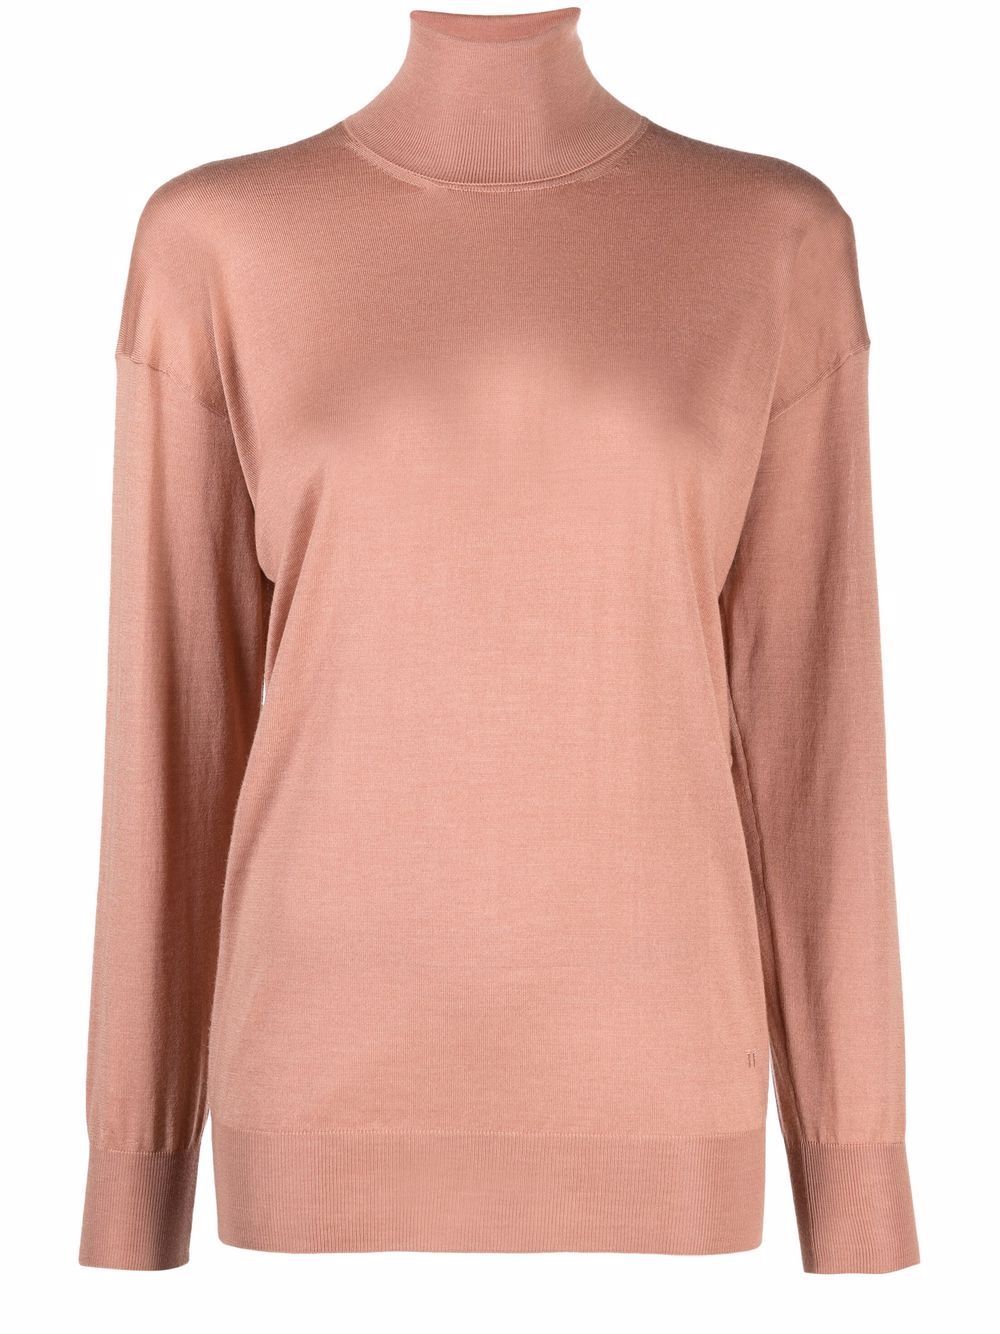 FW21 Nude Cashmere Ribbed Turtleneck Sweater